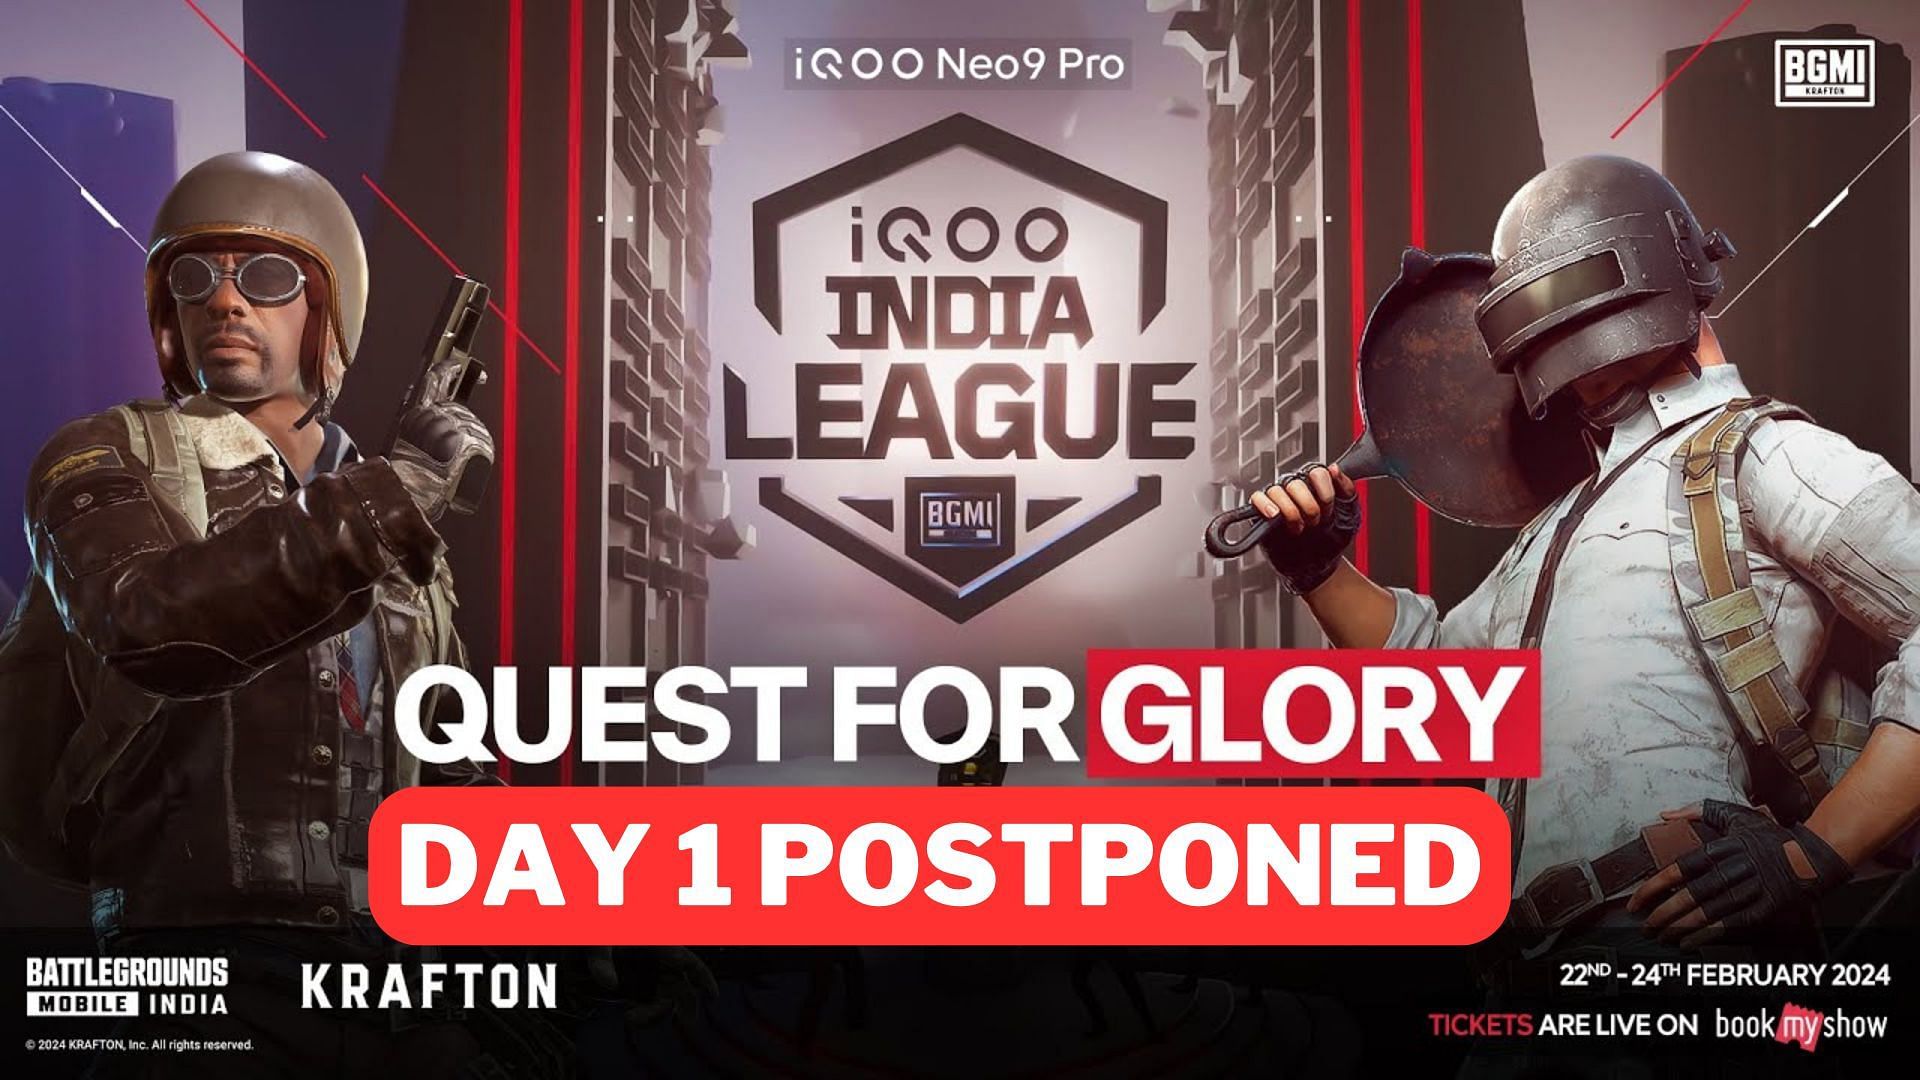 Day 1 of iQOO India League postponed due to technical difficulties (Image via iQOO)